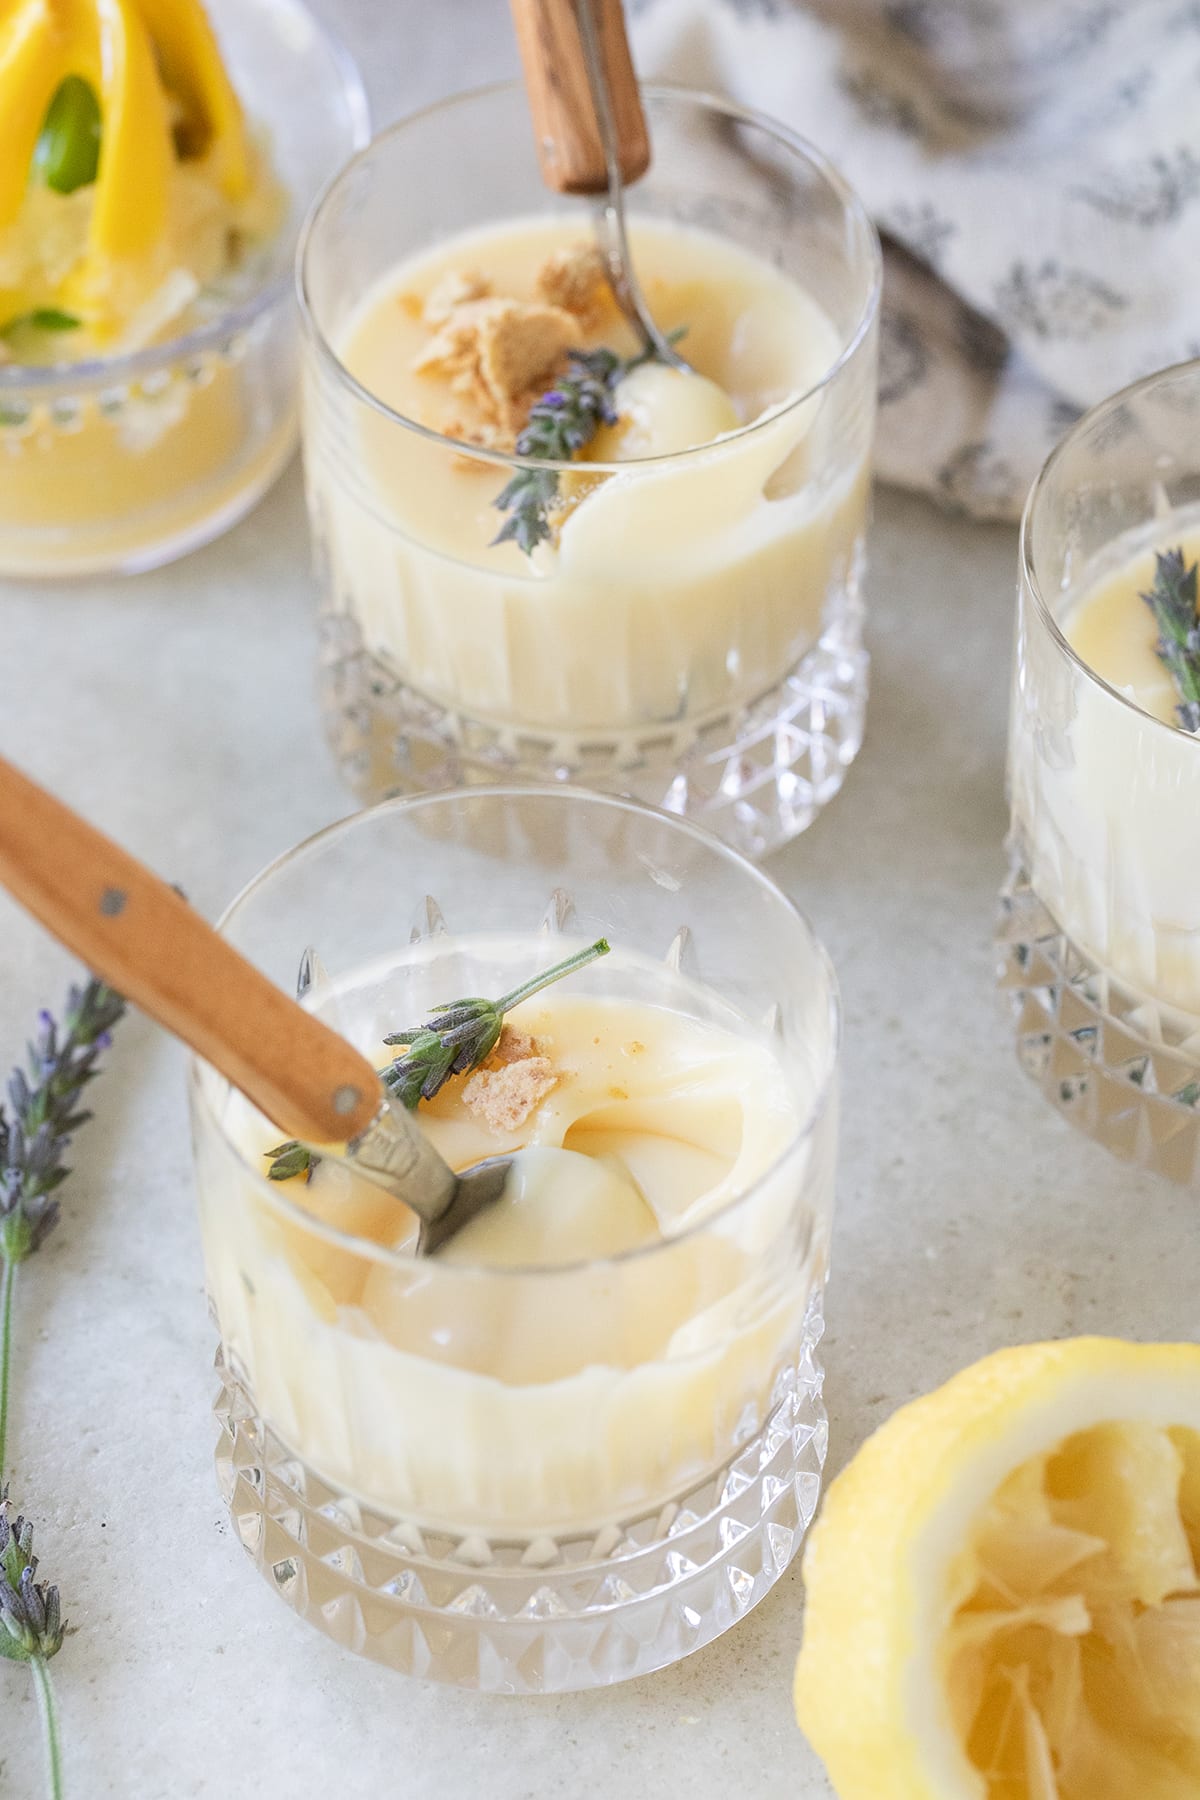 The lemon pot recipe is made with with five ingredients: lemon juice, zest, heavy cream, and sugar.